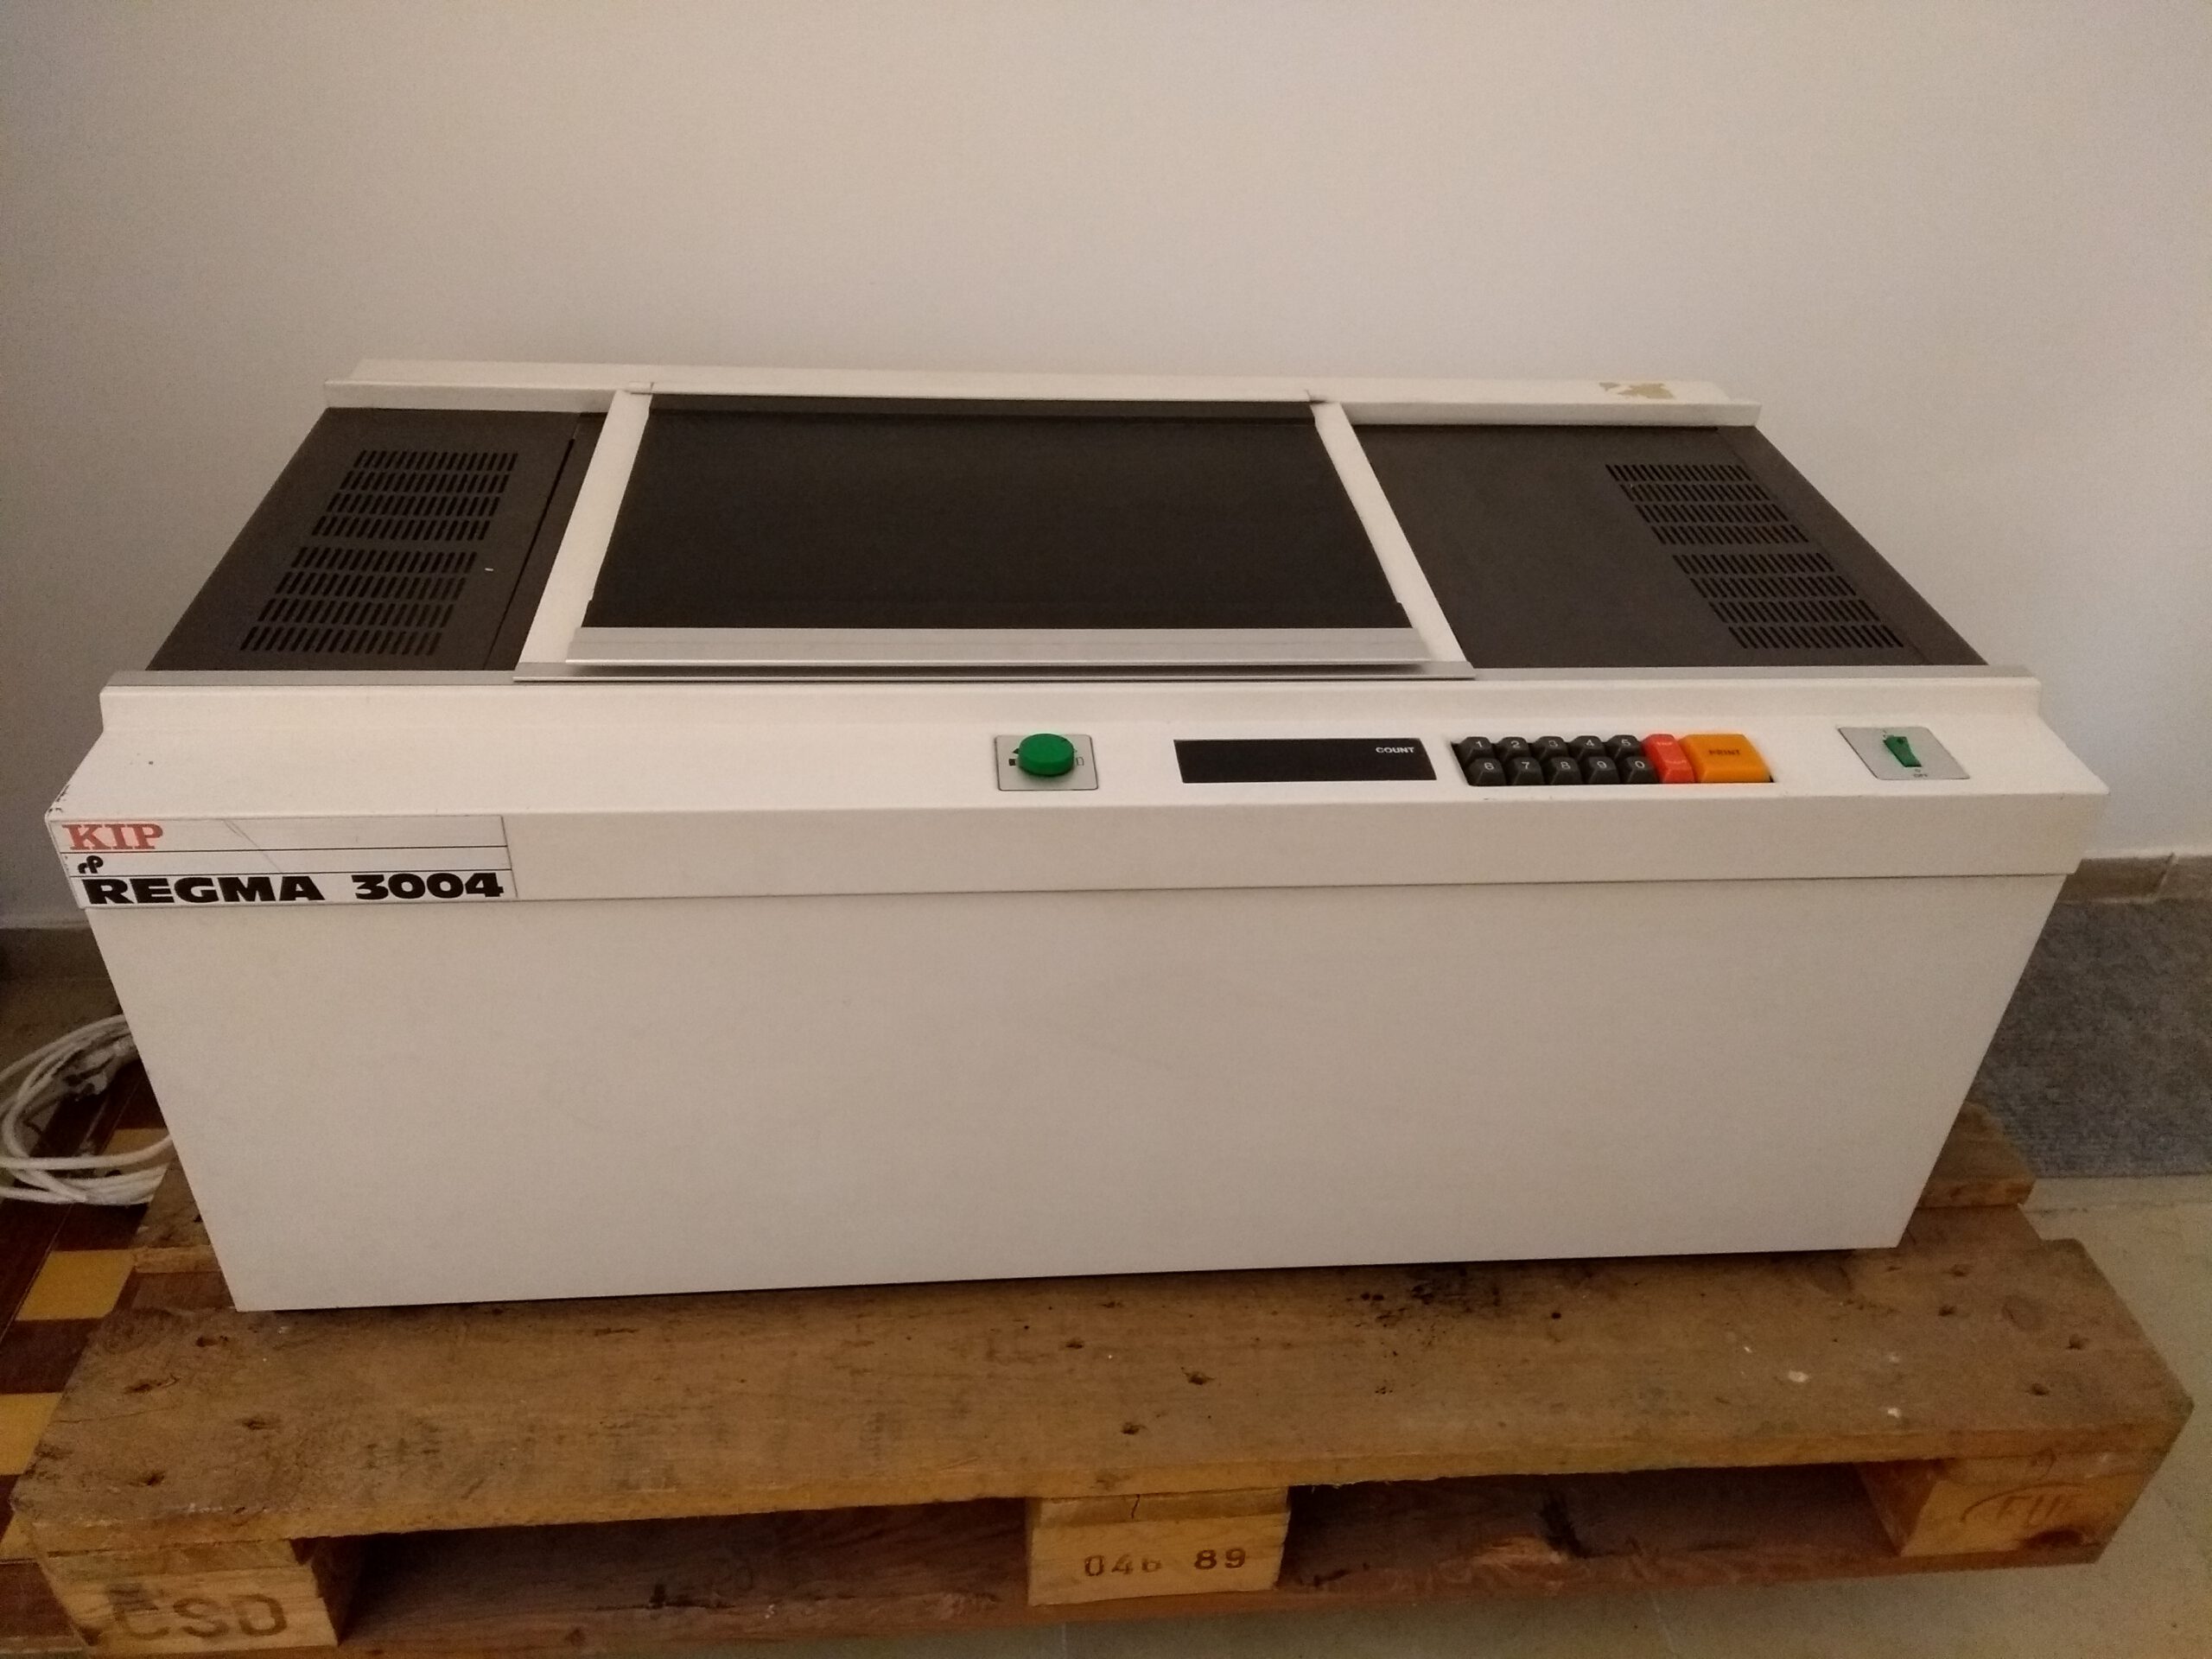 The KIP Regma 3004 copymachine is new in the museum's collection